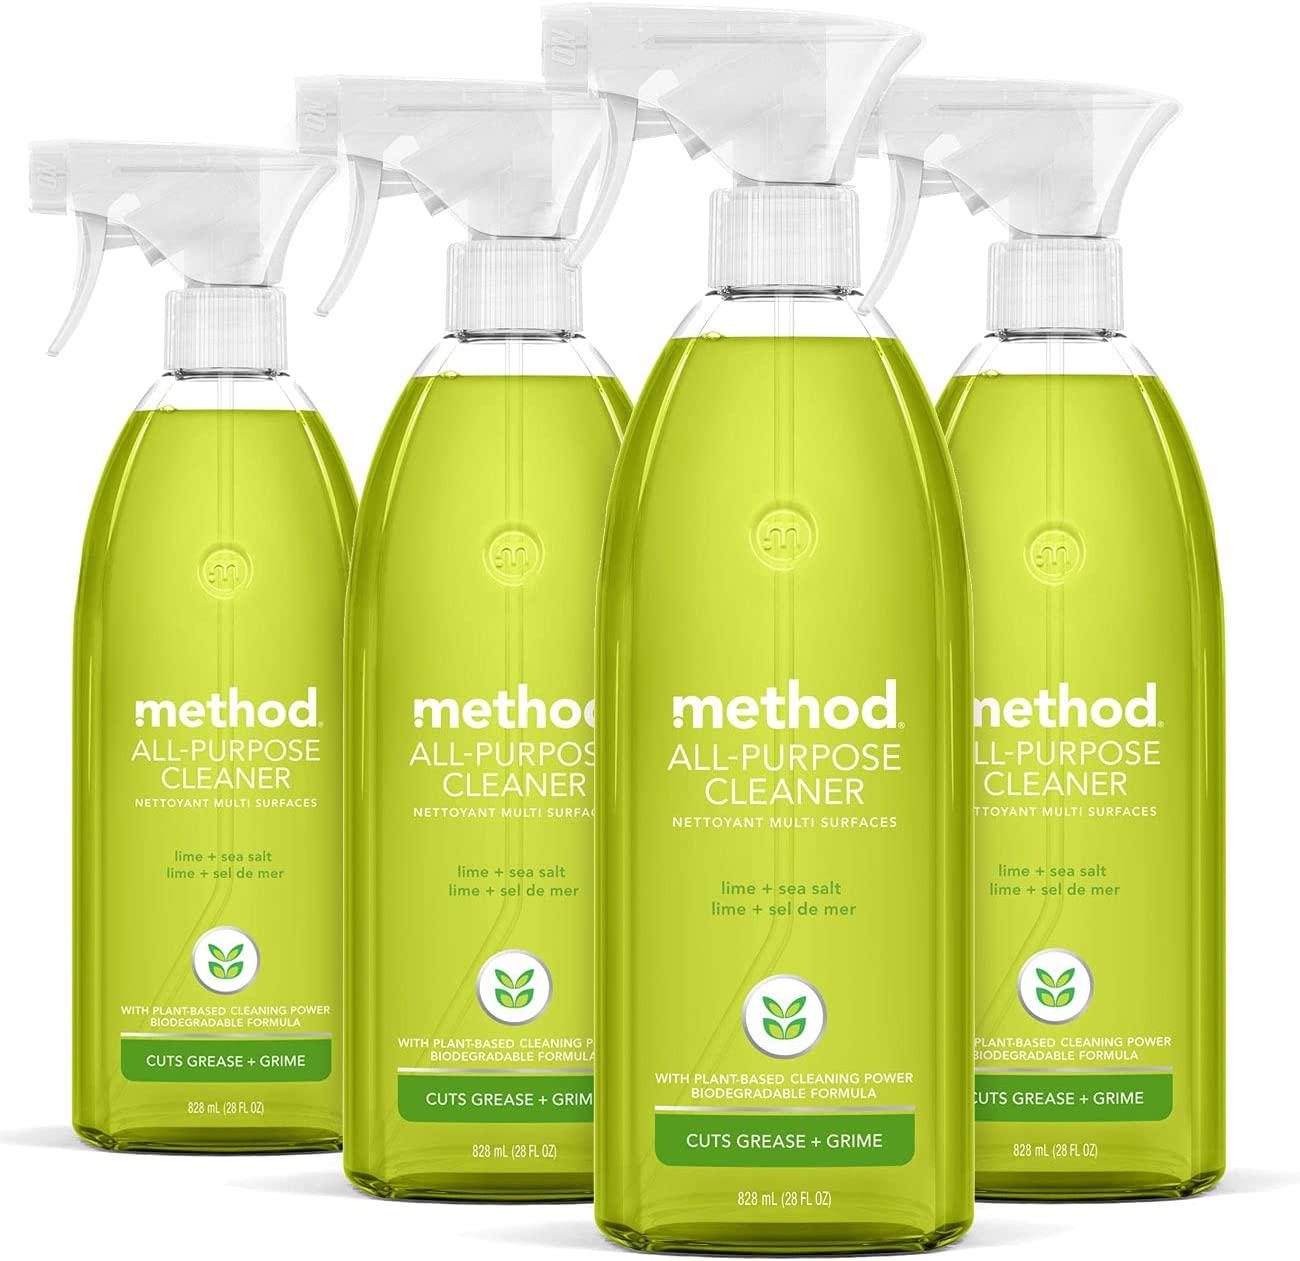 Method All-Purpose Cleaner Spray 4-Pack for $9.32 Shipped